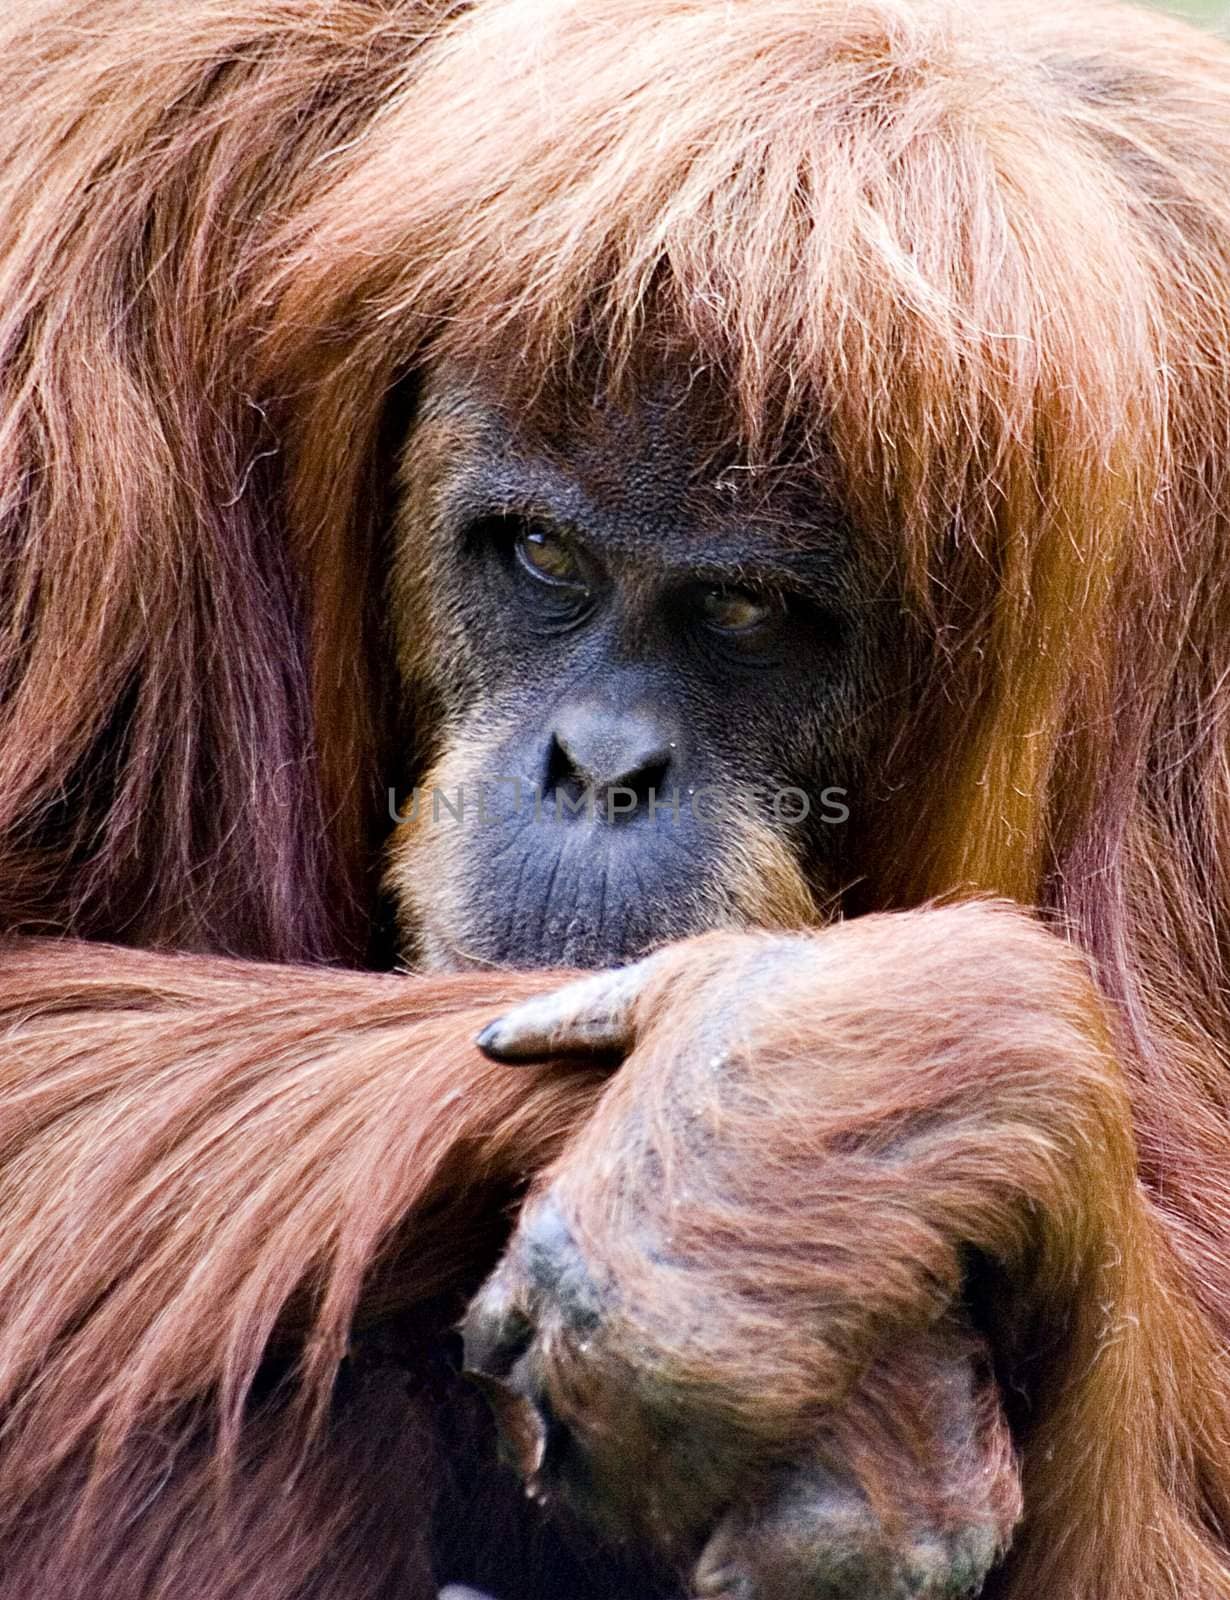 An orang uan stares from behind his folded hands